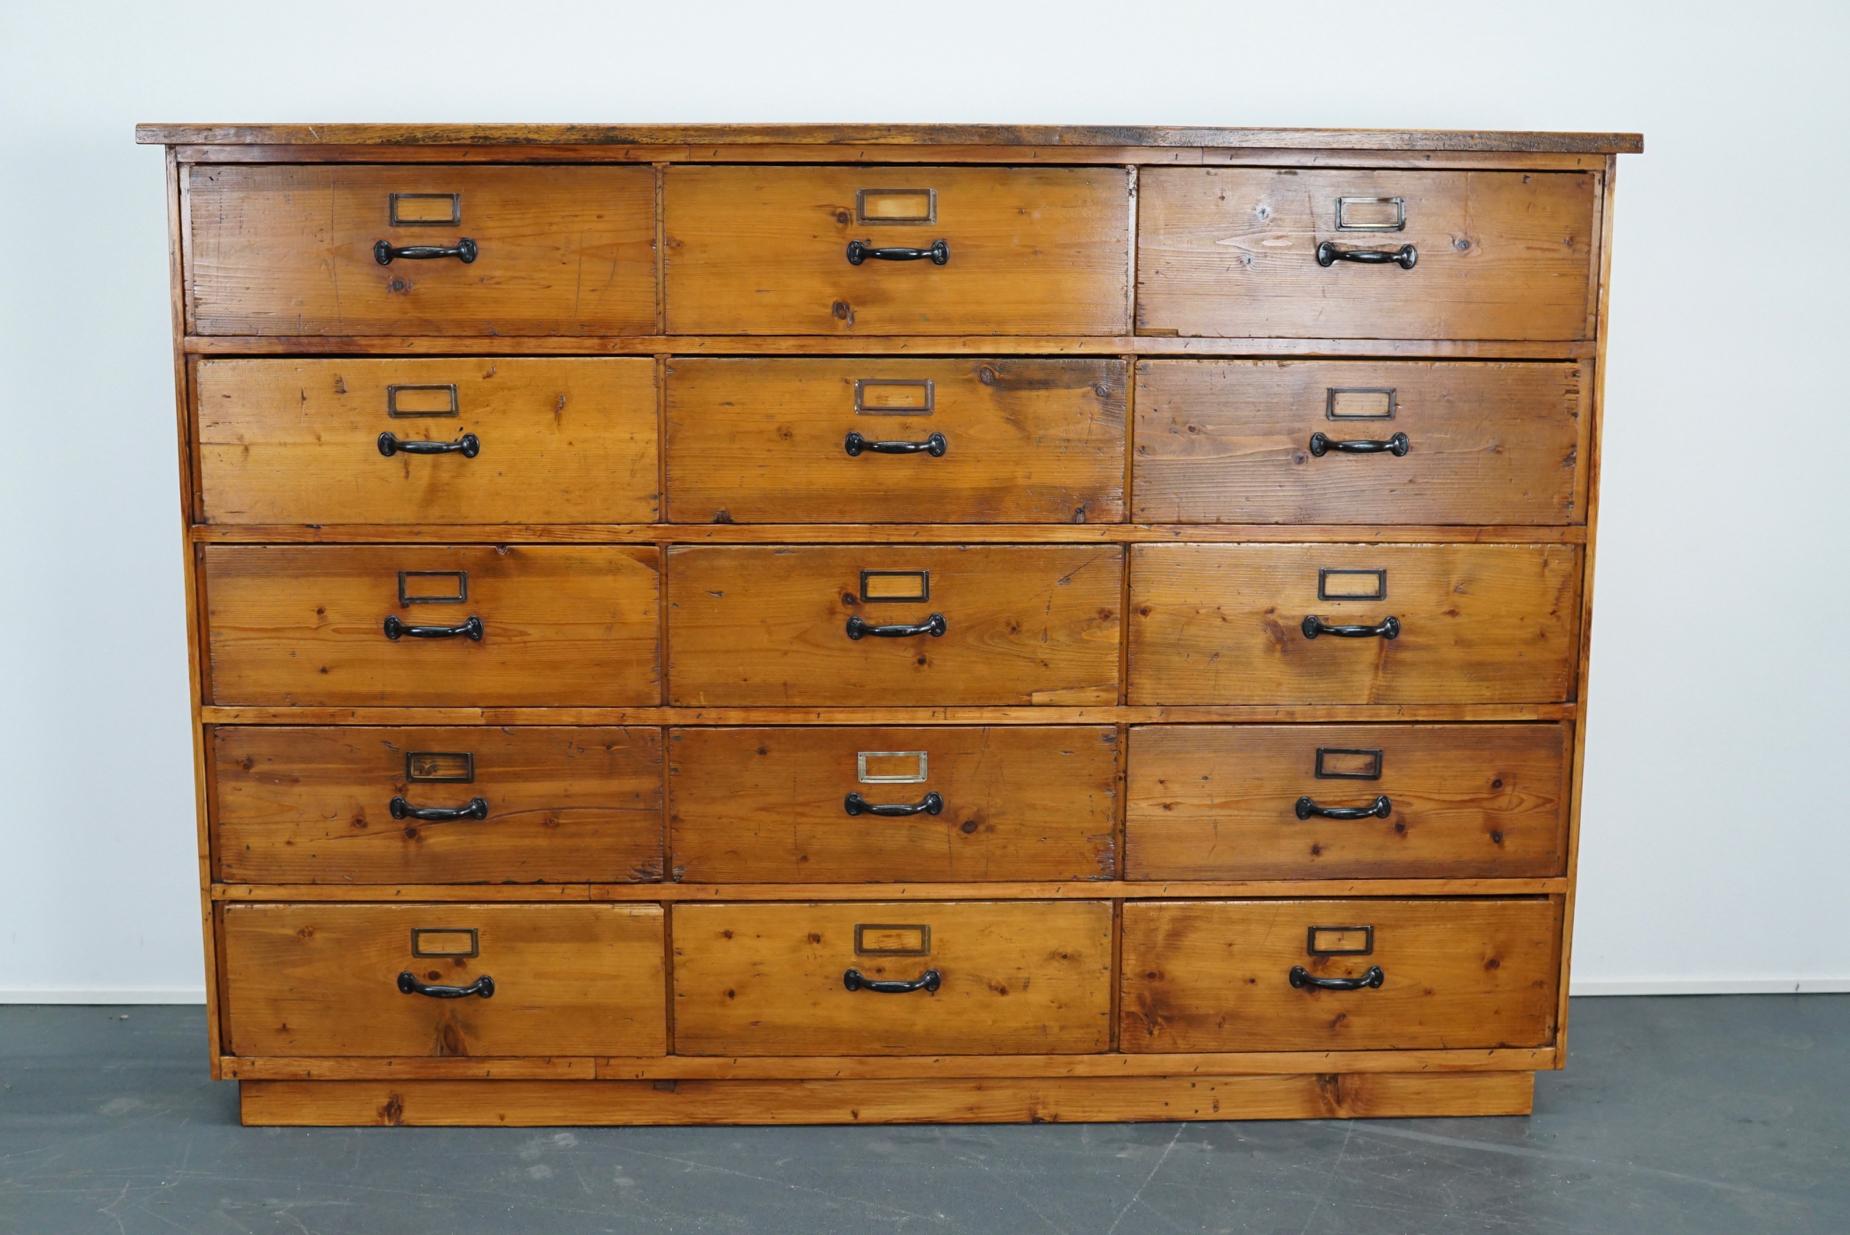 This apothecary cabinet of drawers was designed, circa 1950s in Germany. The piece is made from pine and features 15 large drawers with metal hardware. The interior dimensions of the drawers are: D 38 x W 49 x H 18 cm.